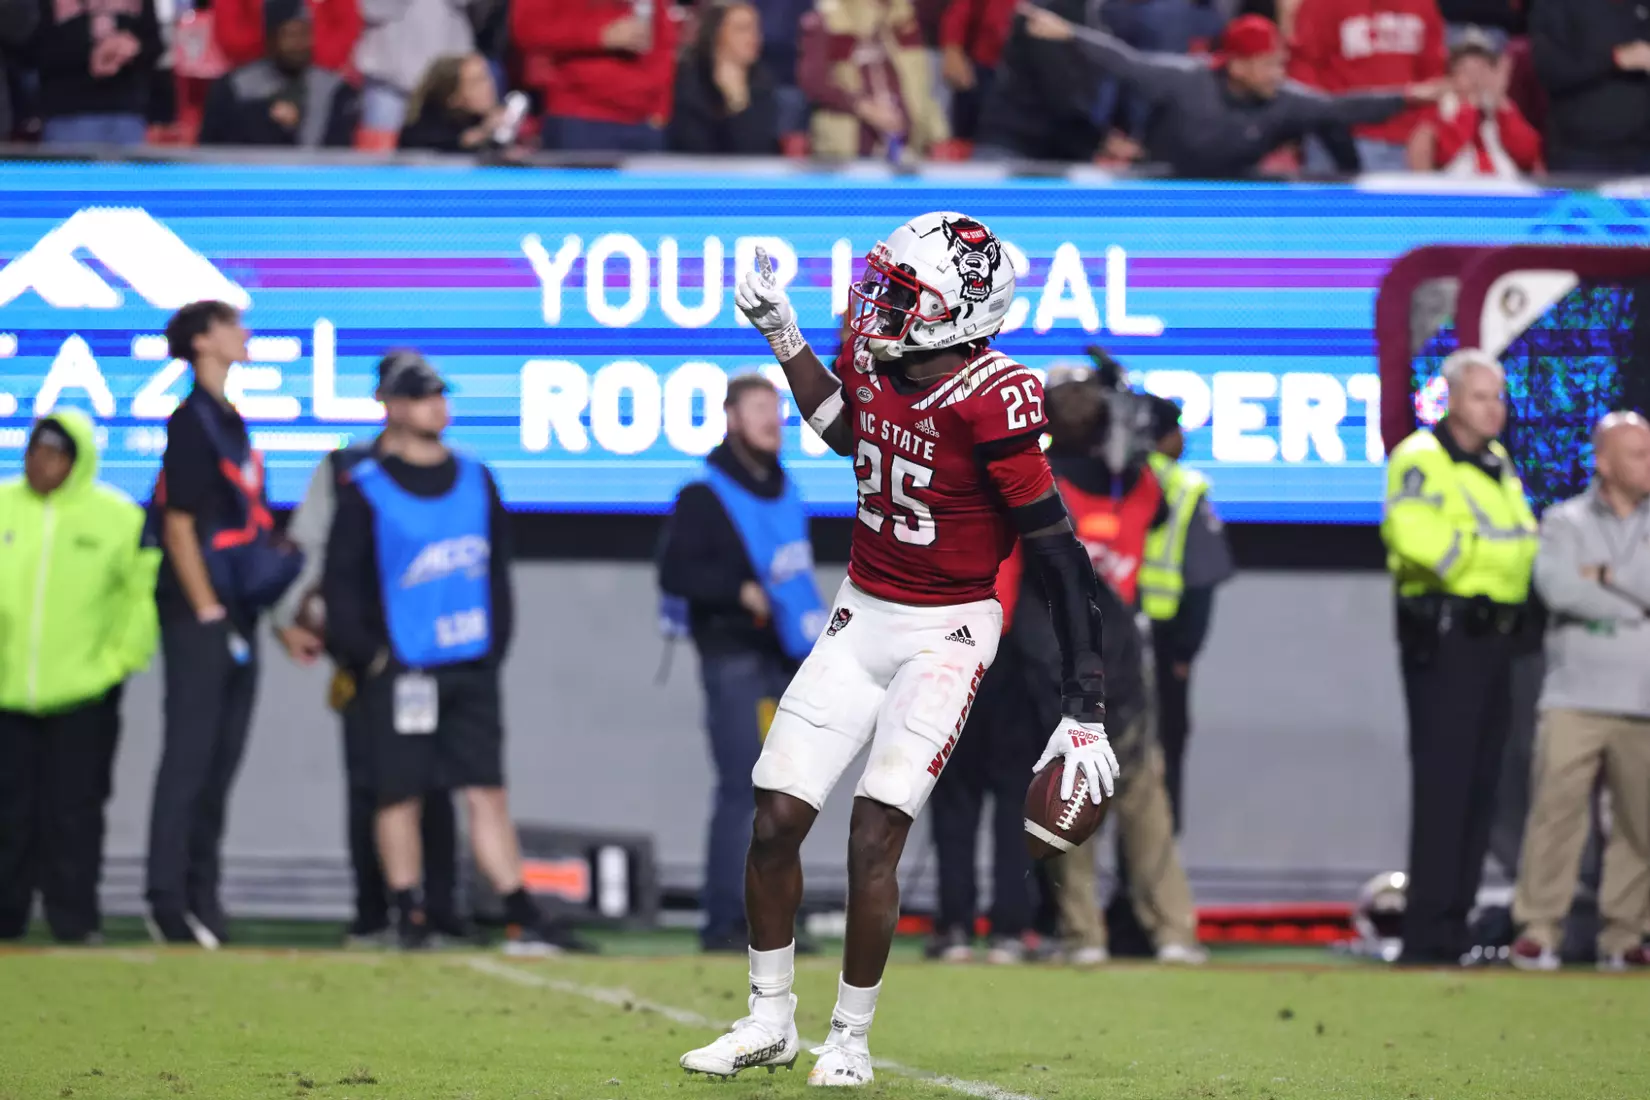 Shyheim Battle is a big DB with great length for North Carolina State who possesses good lateral quickness. Hula Bowl scout Jake Kernen breaks down Battle as an NFL Prospect in his report.